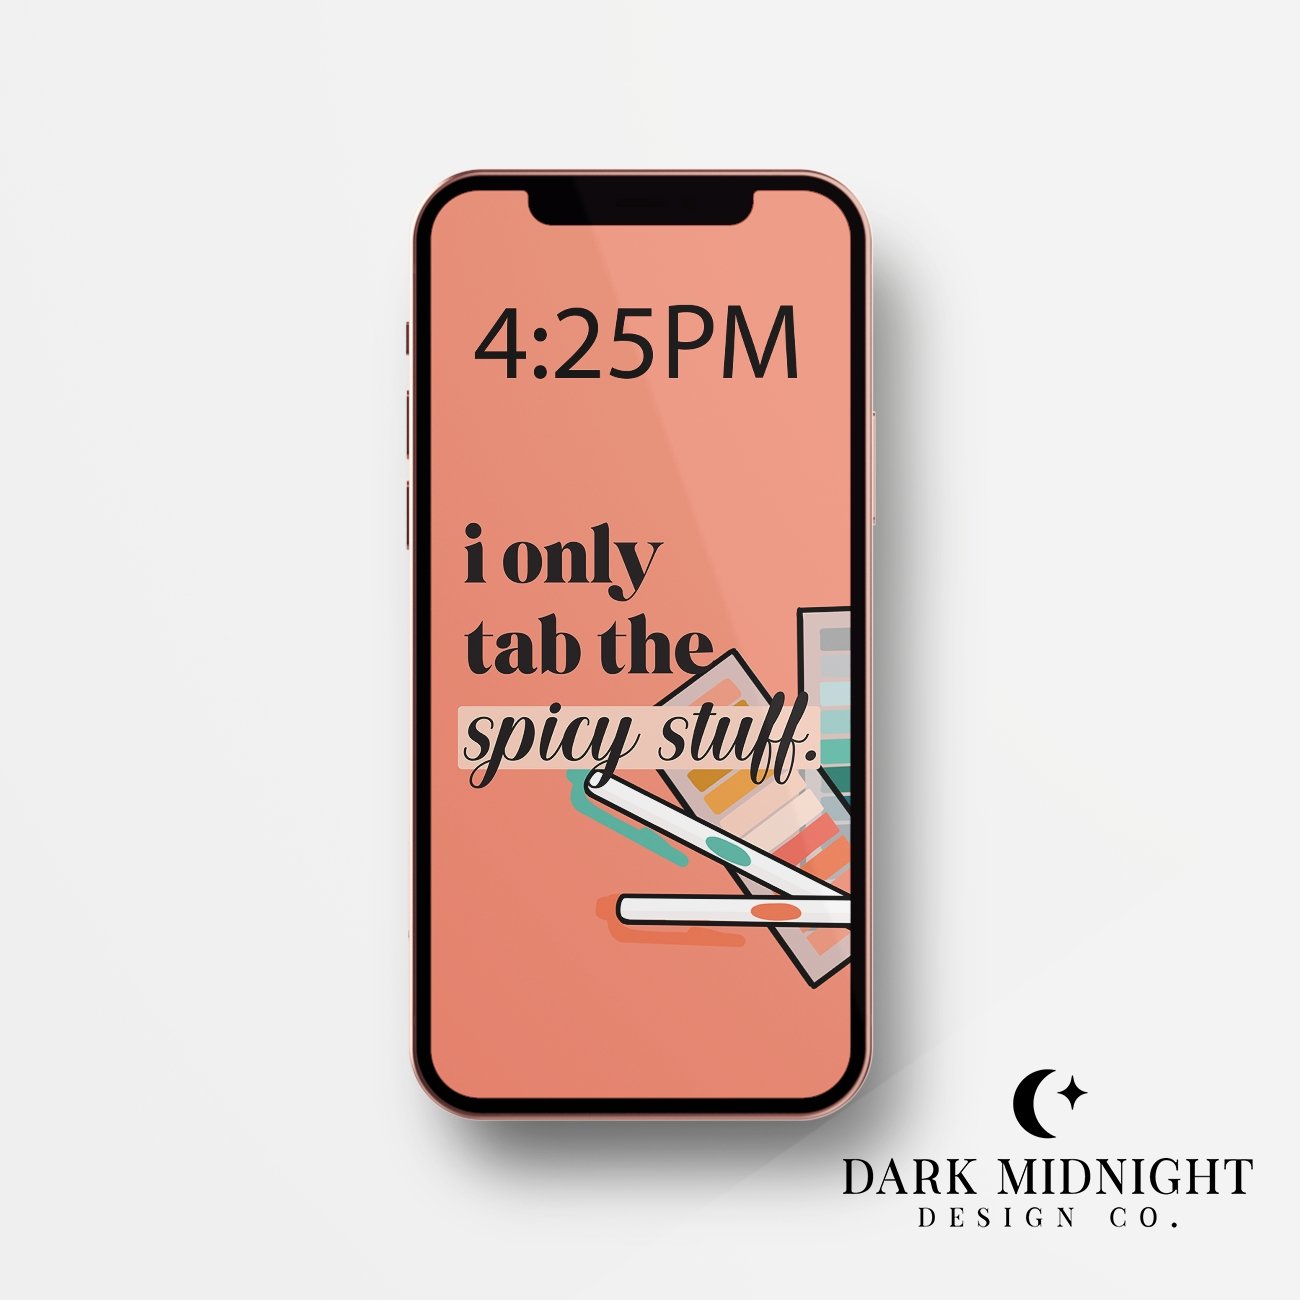 I Only Tab The Spicy Stuff Phone Wallpaper - Dark Midnight Design Co